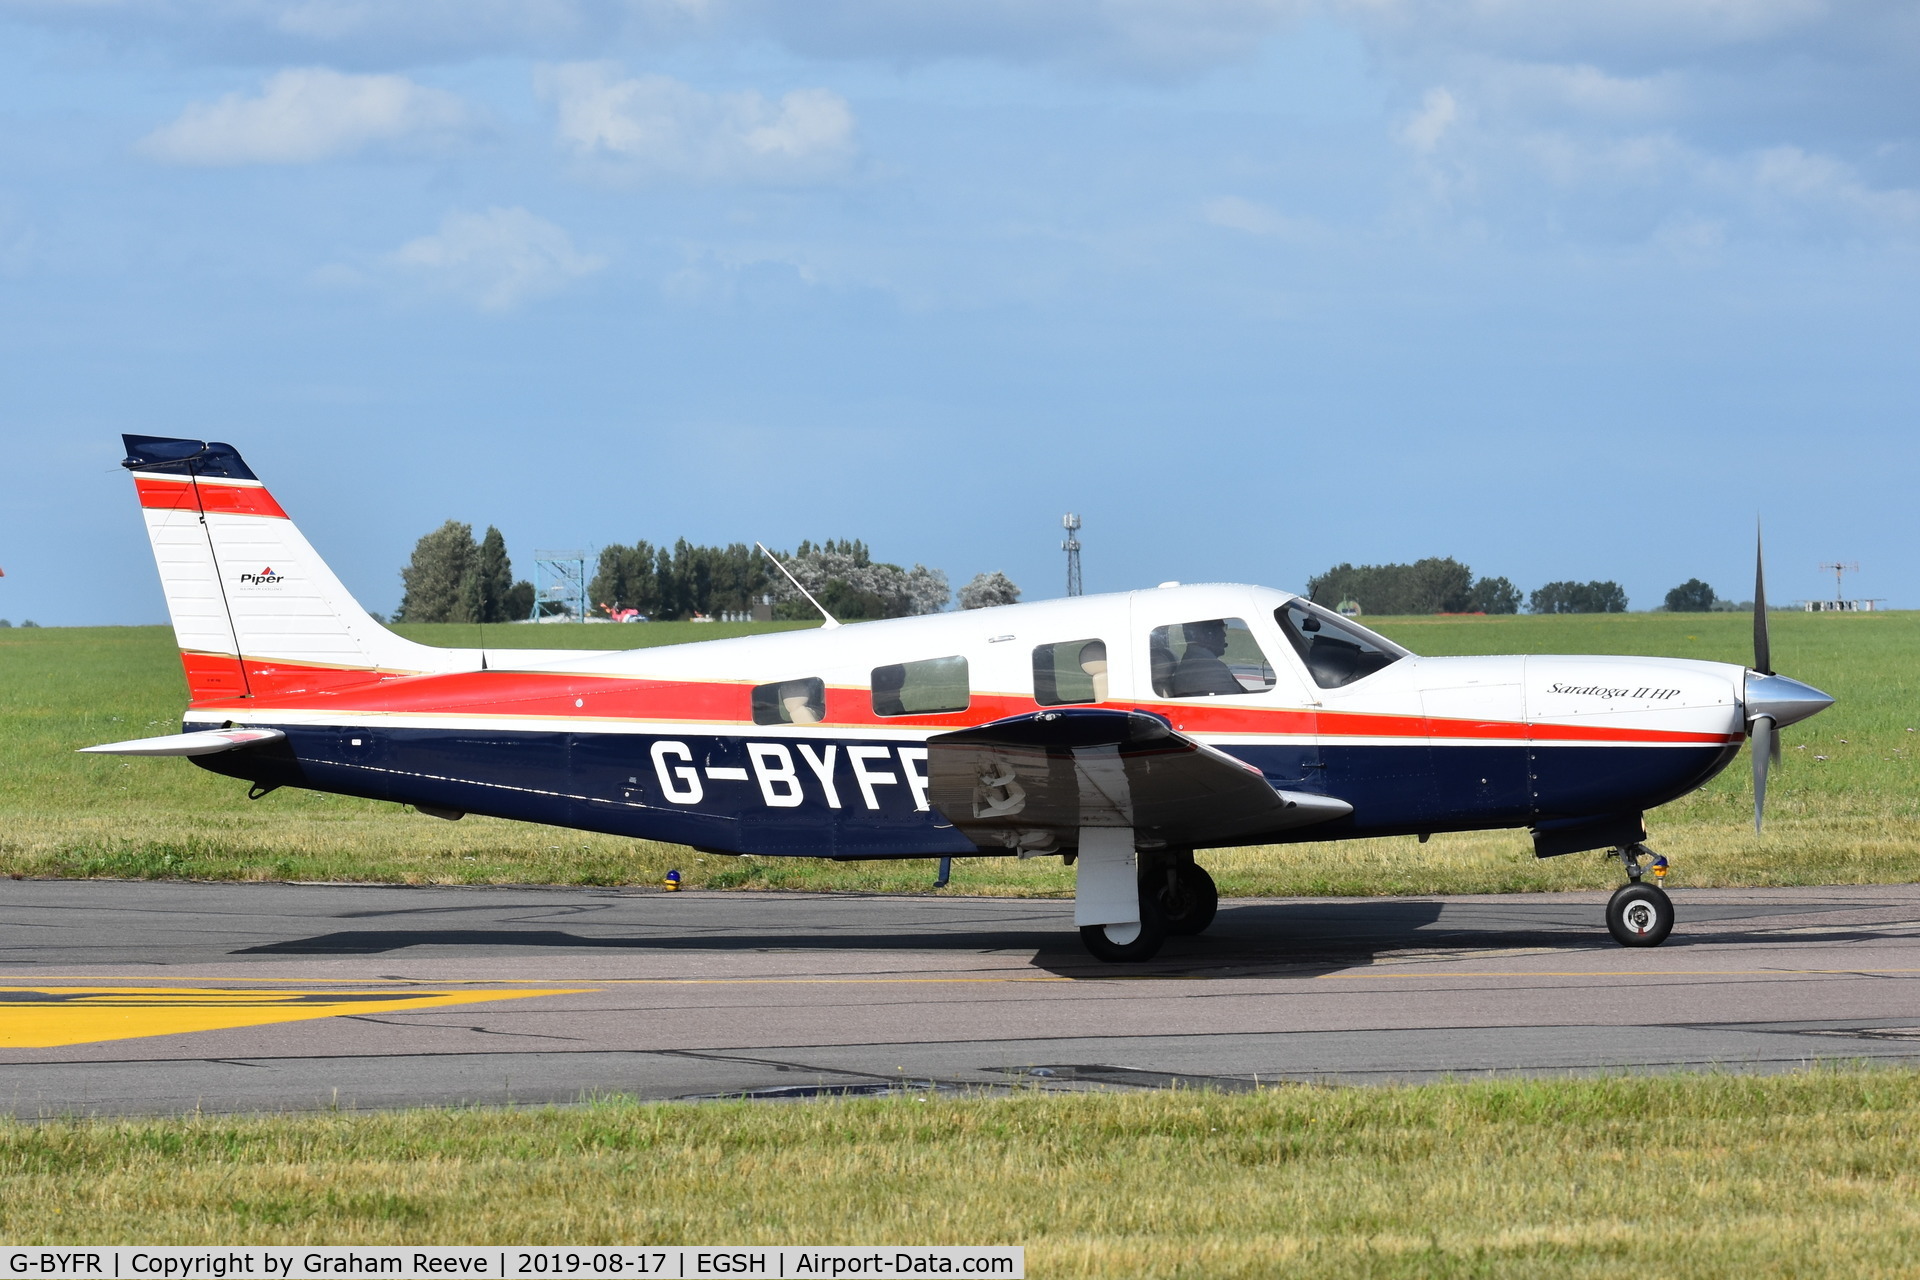 G-BYFR, 1999 Piper PA-32R-301 Saratoga SP C/N 3246133, Departing from Norwich.